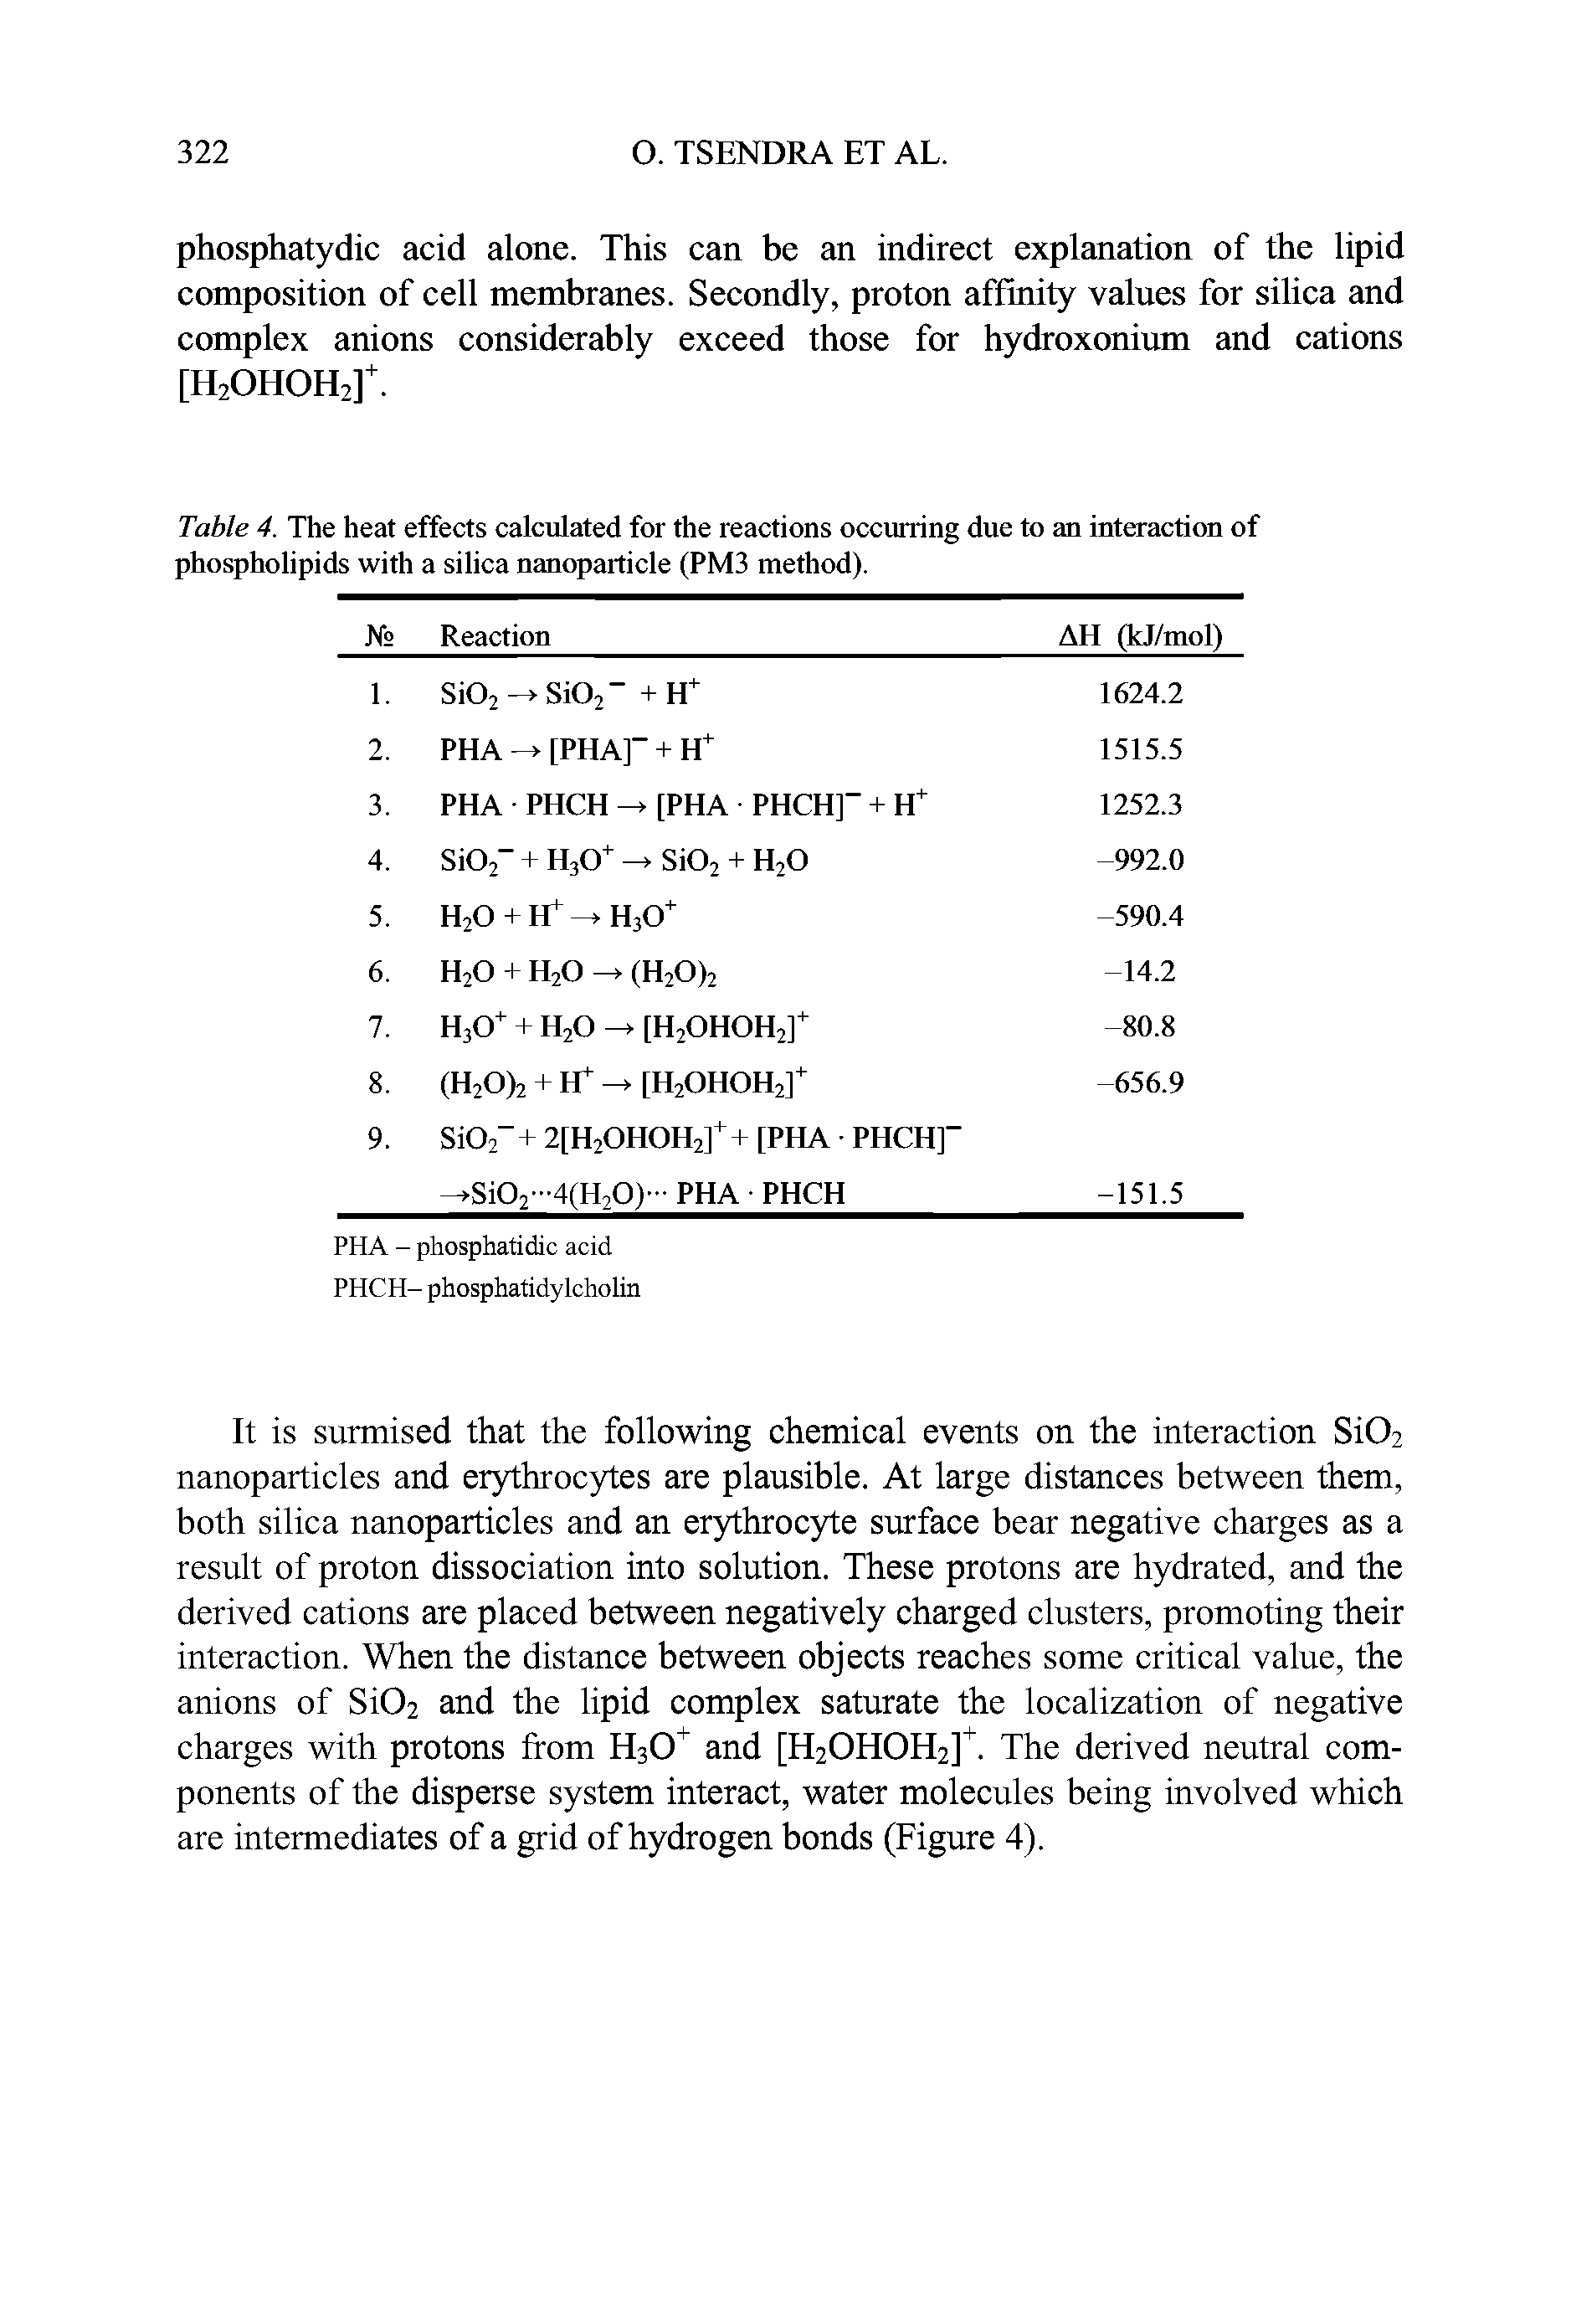 Table 4. The heat effects calculated for the reactions occurring due to an interaction of phospholipids with a silica nanoparticle (PM3 method).